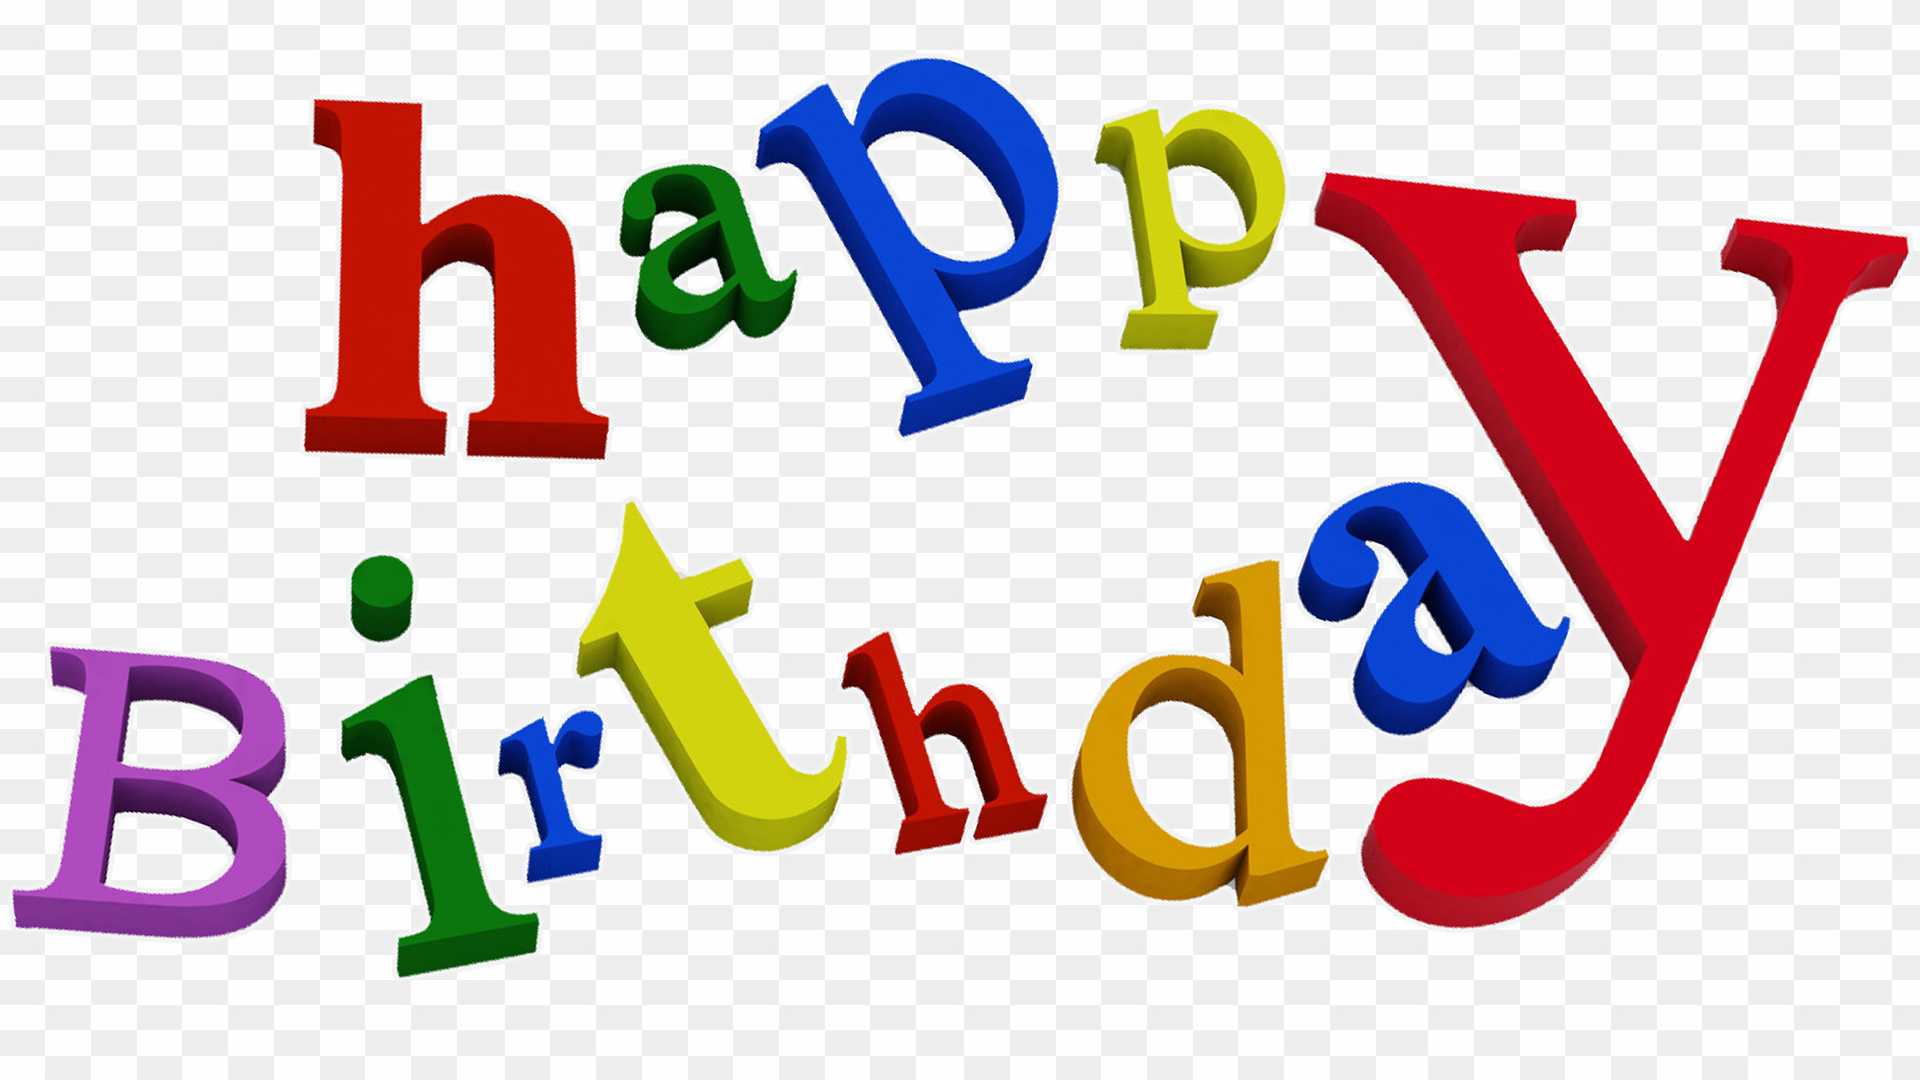 Happy Birthday stylish font text PNG images download